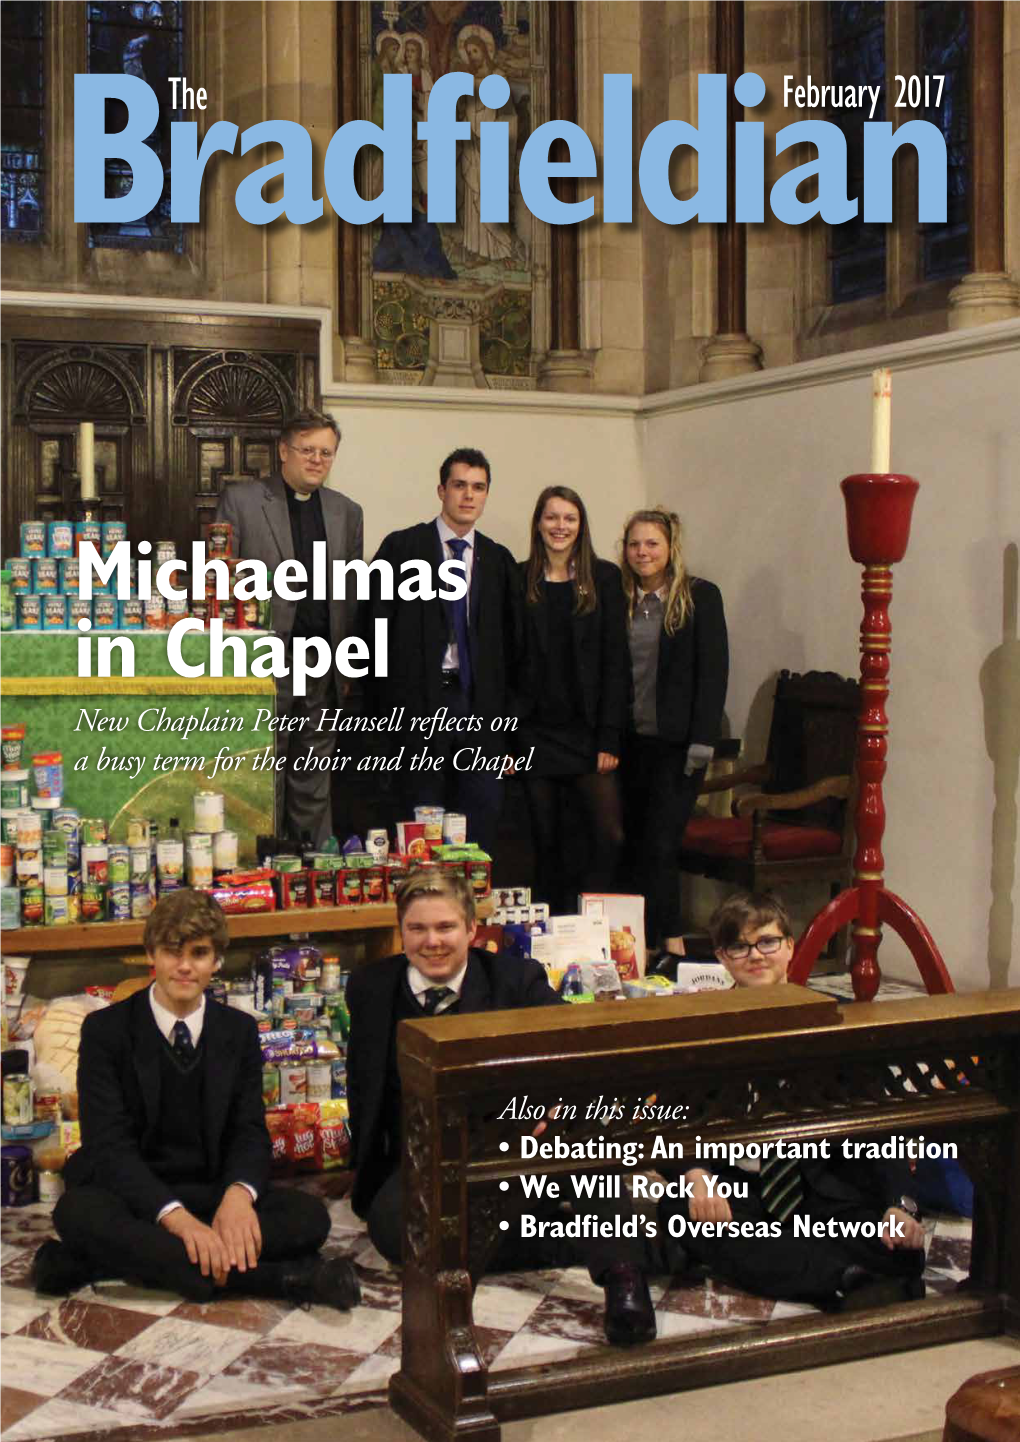 Michaelmas in Chapel FEBRUARY 2017 New Chaplain Peter Hansell Reflects on a Busy Term for the Choir and the Chapel